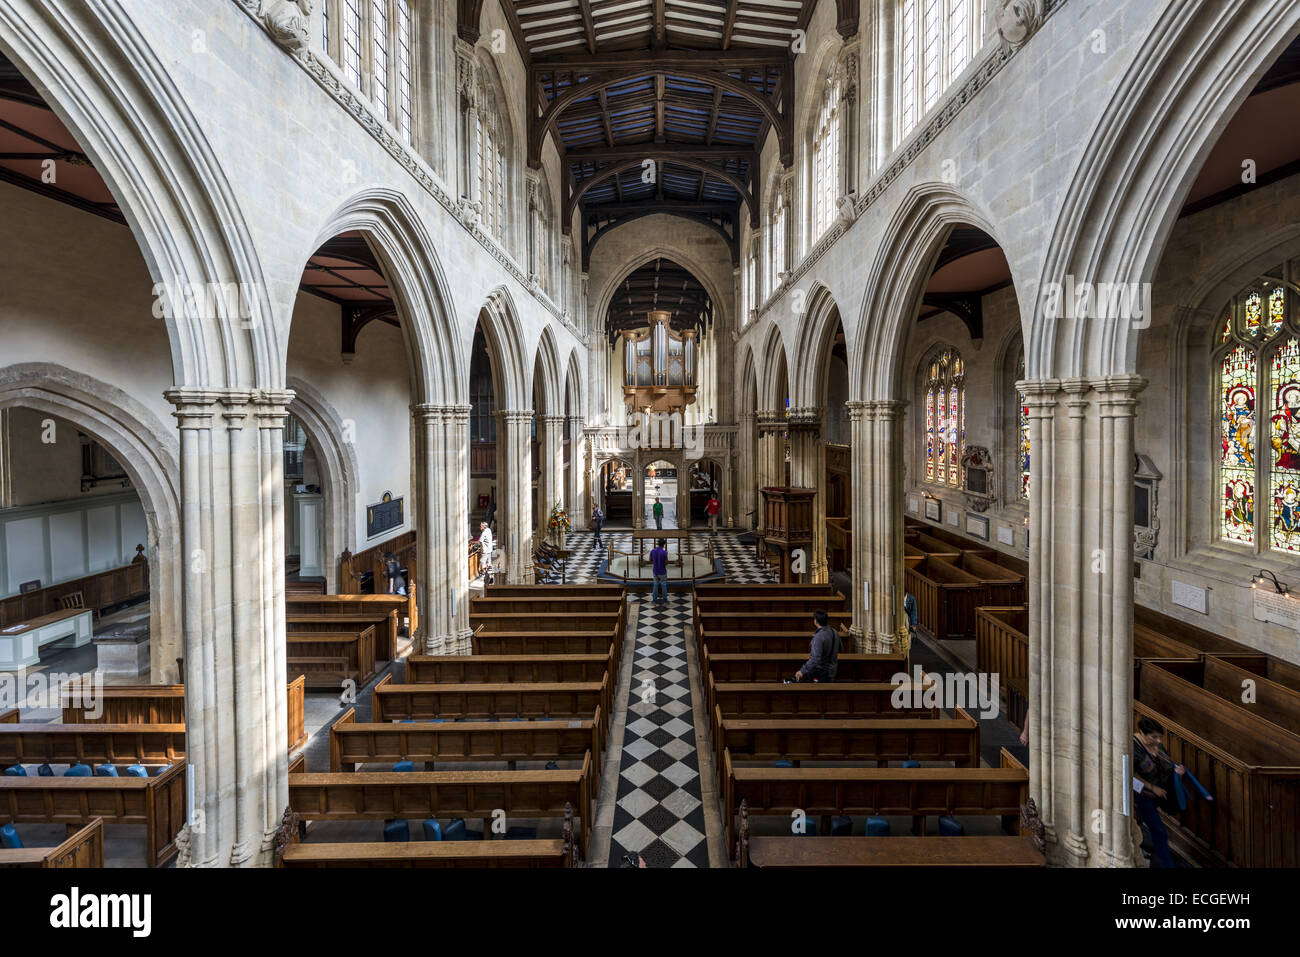 Inside the University Church of St Mary the Virgin, on the High Street, Oxford, UK. Stock Photo